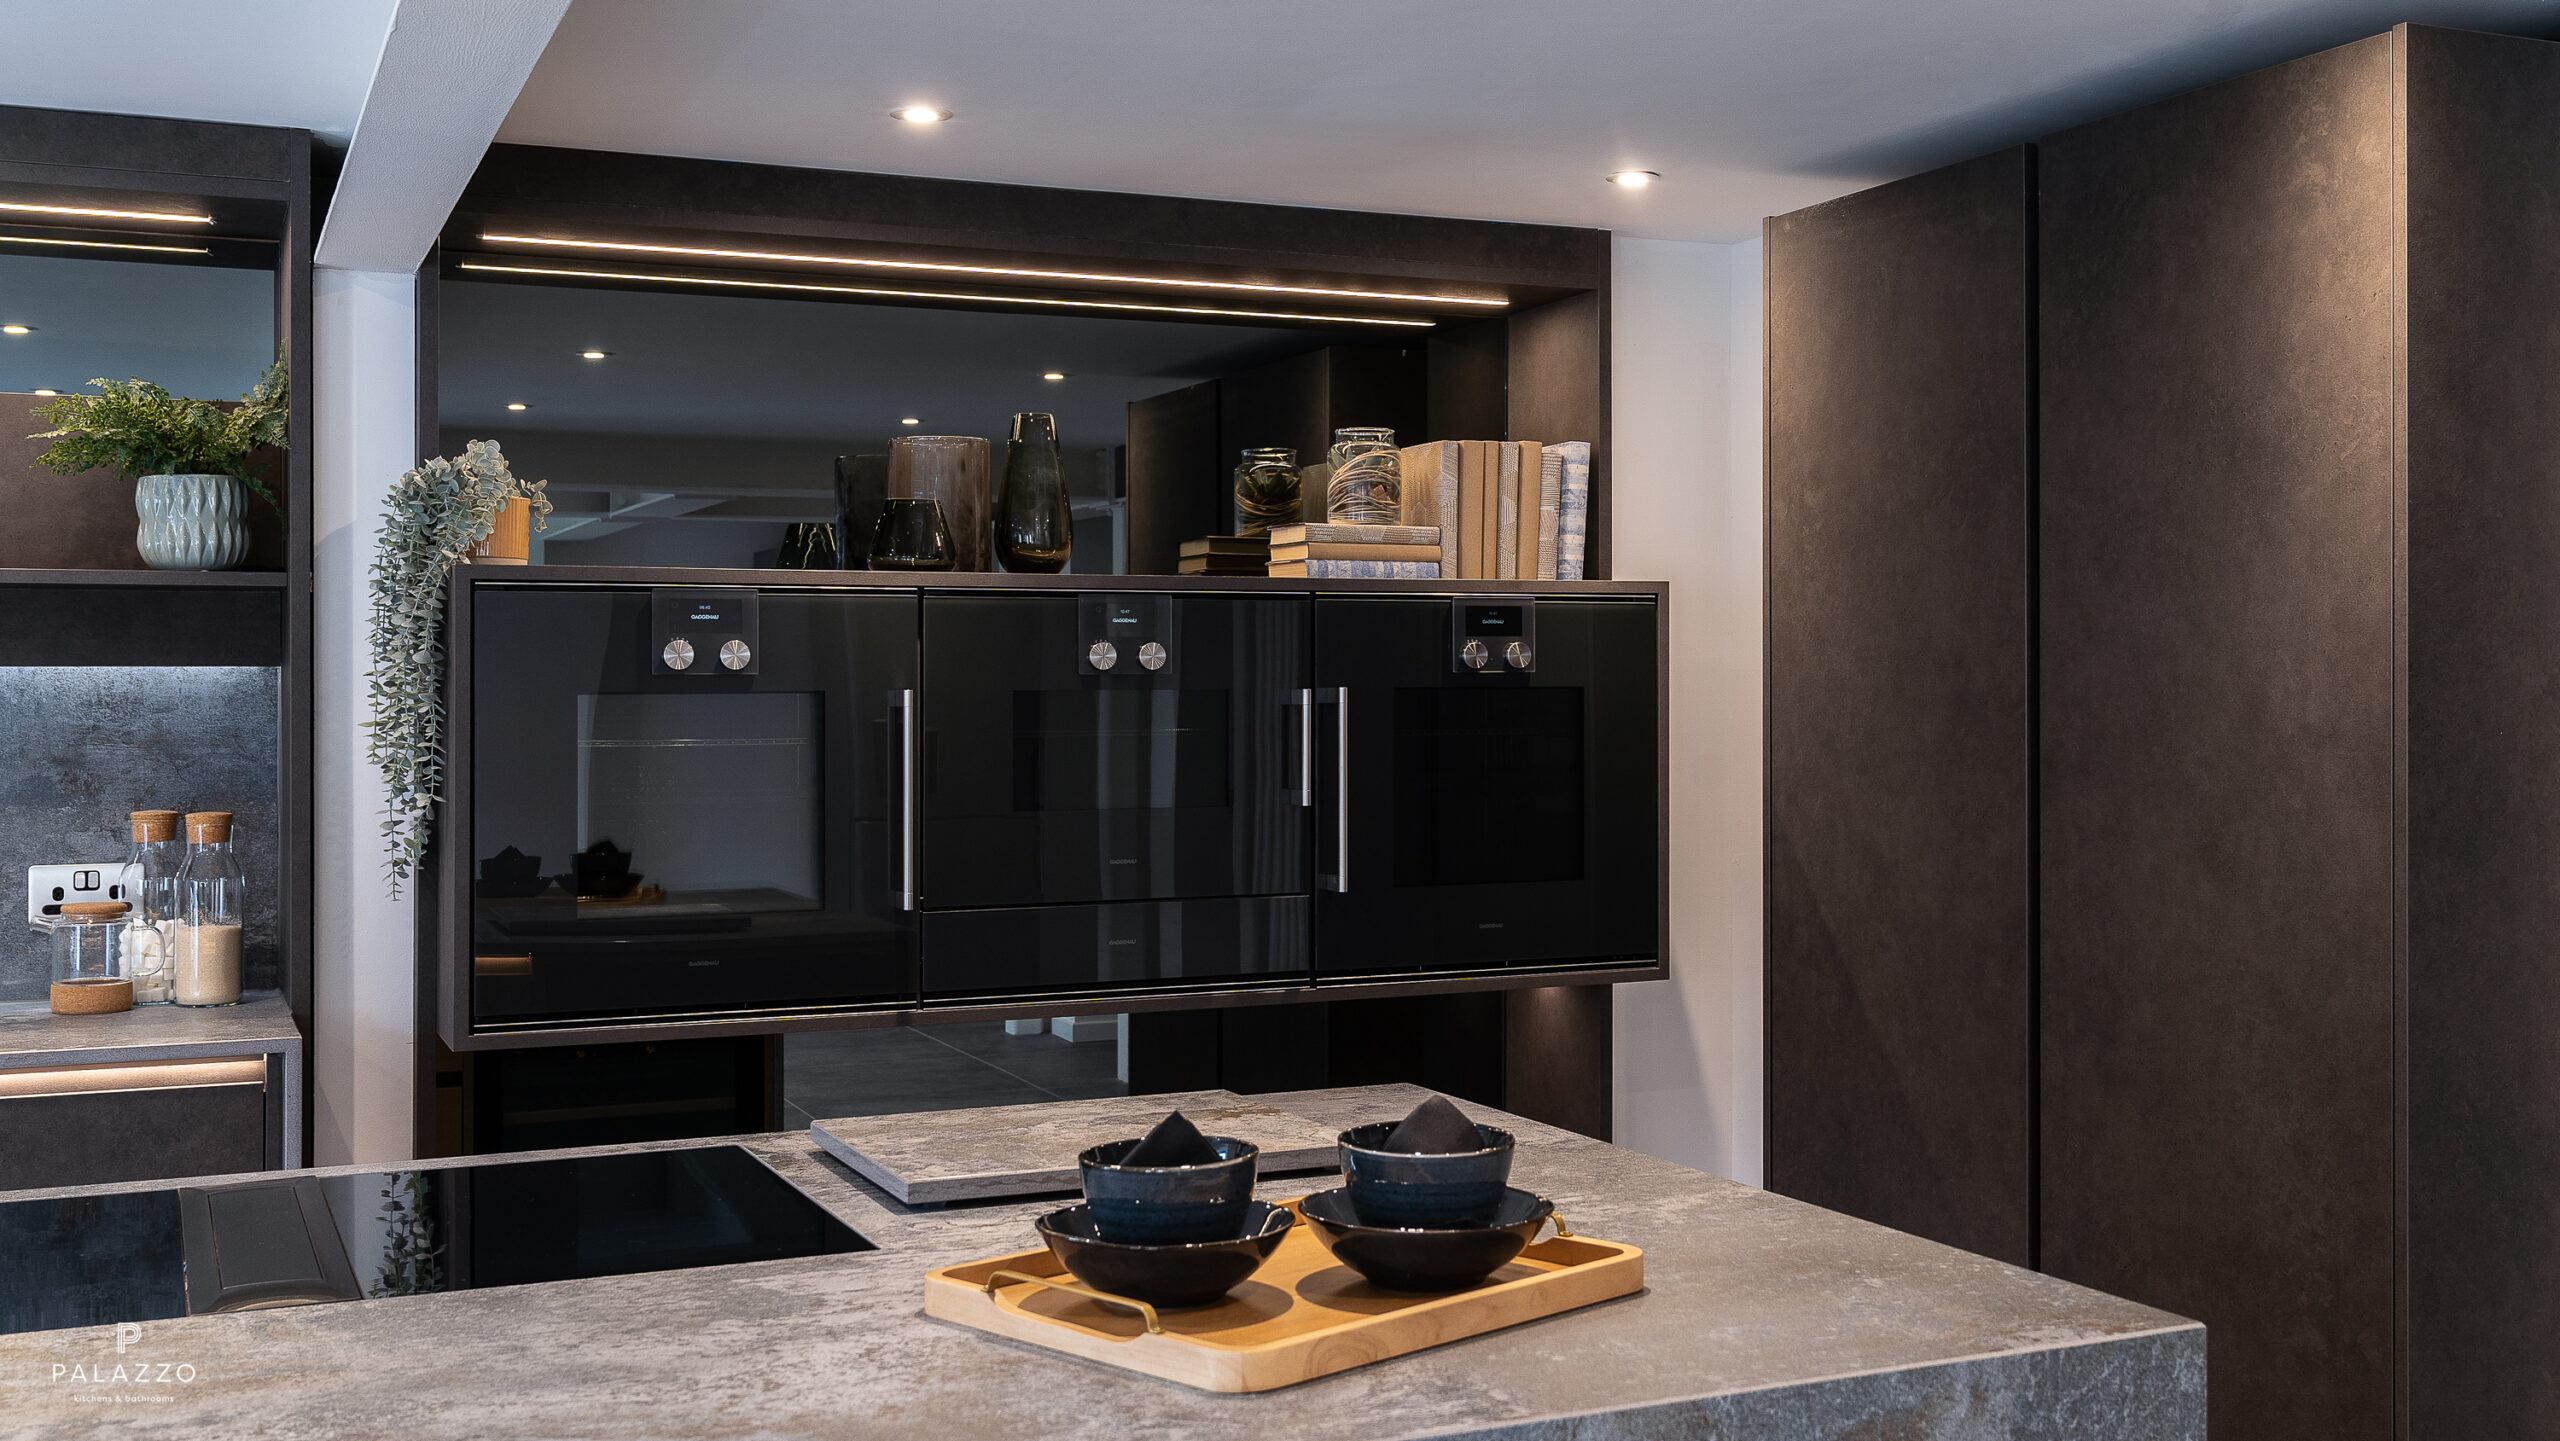 Image 2: Take a look at this Glasgow kitchen design